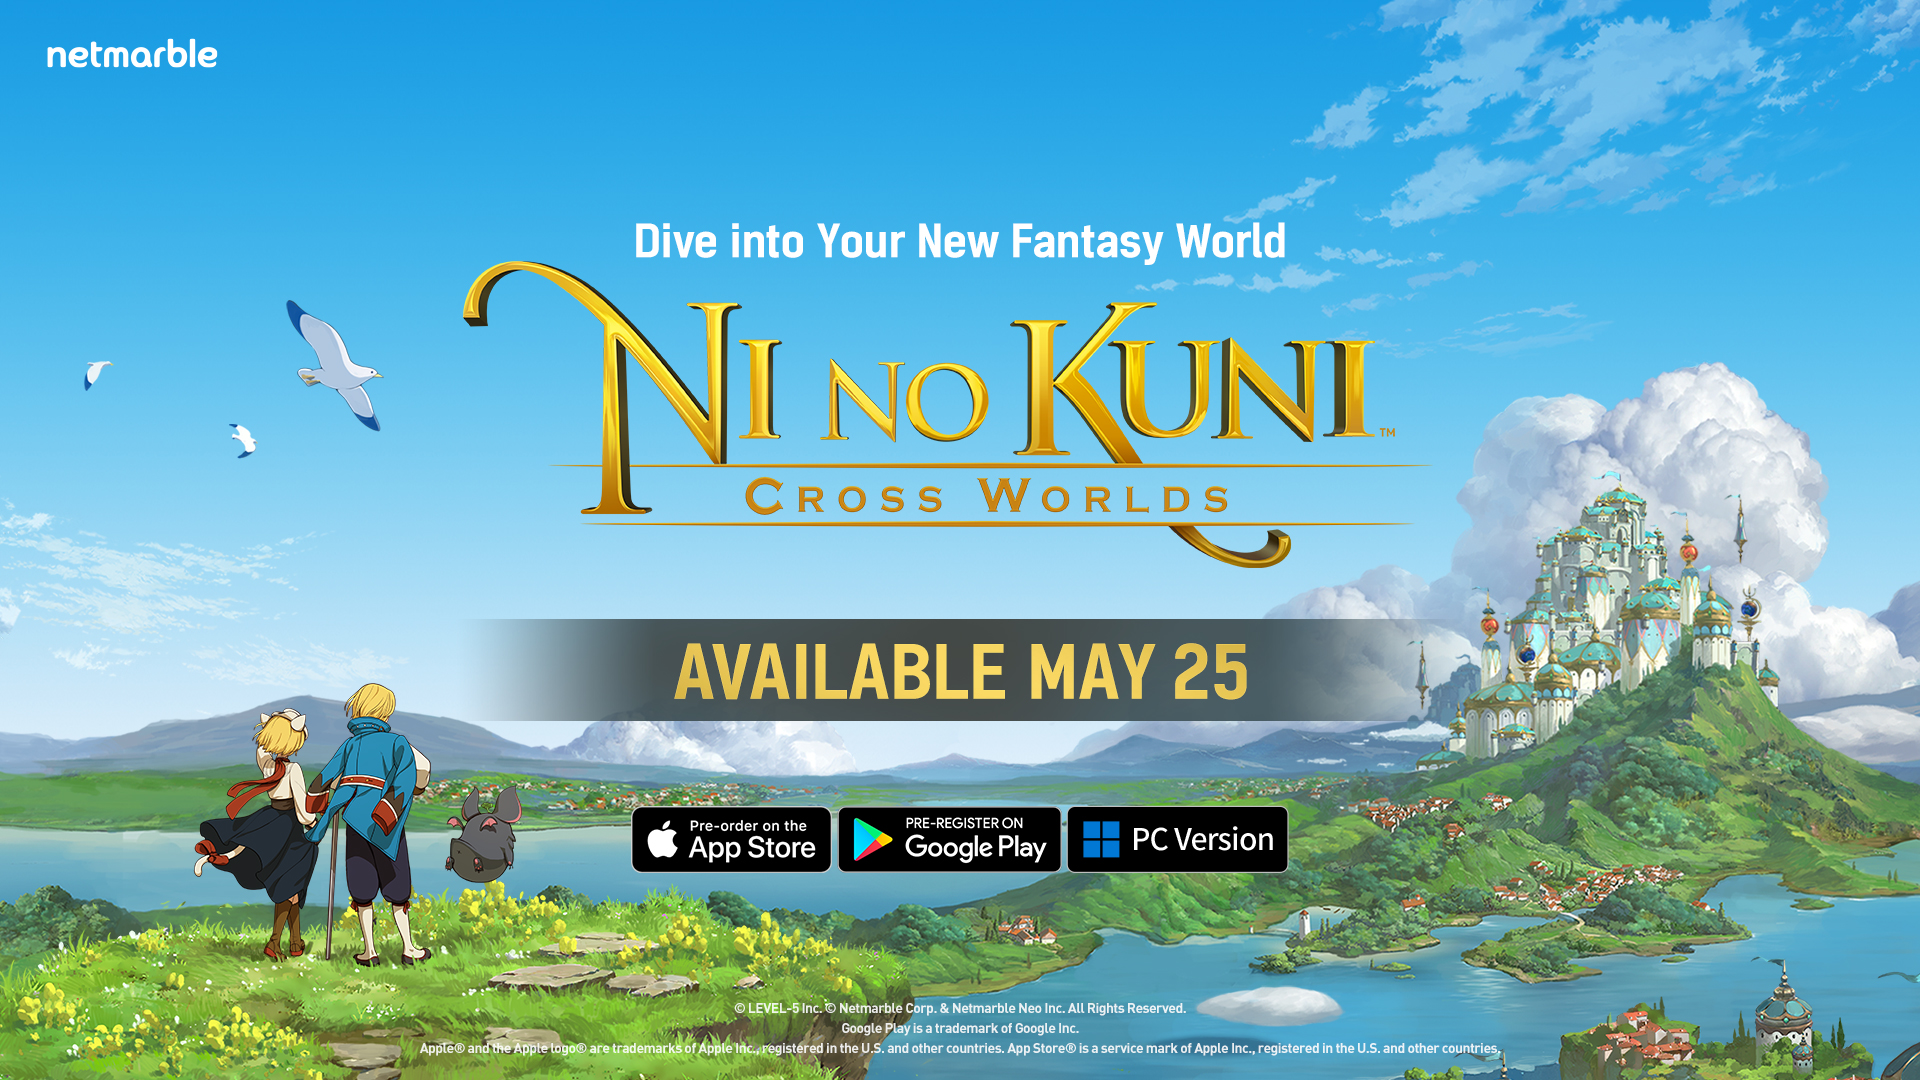 The Ni no Kuni: Cross Winds logo is a the top centre. Underneath is the launch date: May 25. Two people stand at the bottom left, backs to us. They are gazing at a kingdom in the distance, in the upper right hand side.